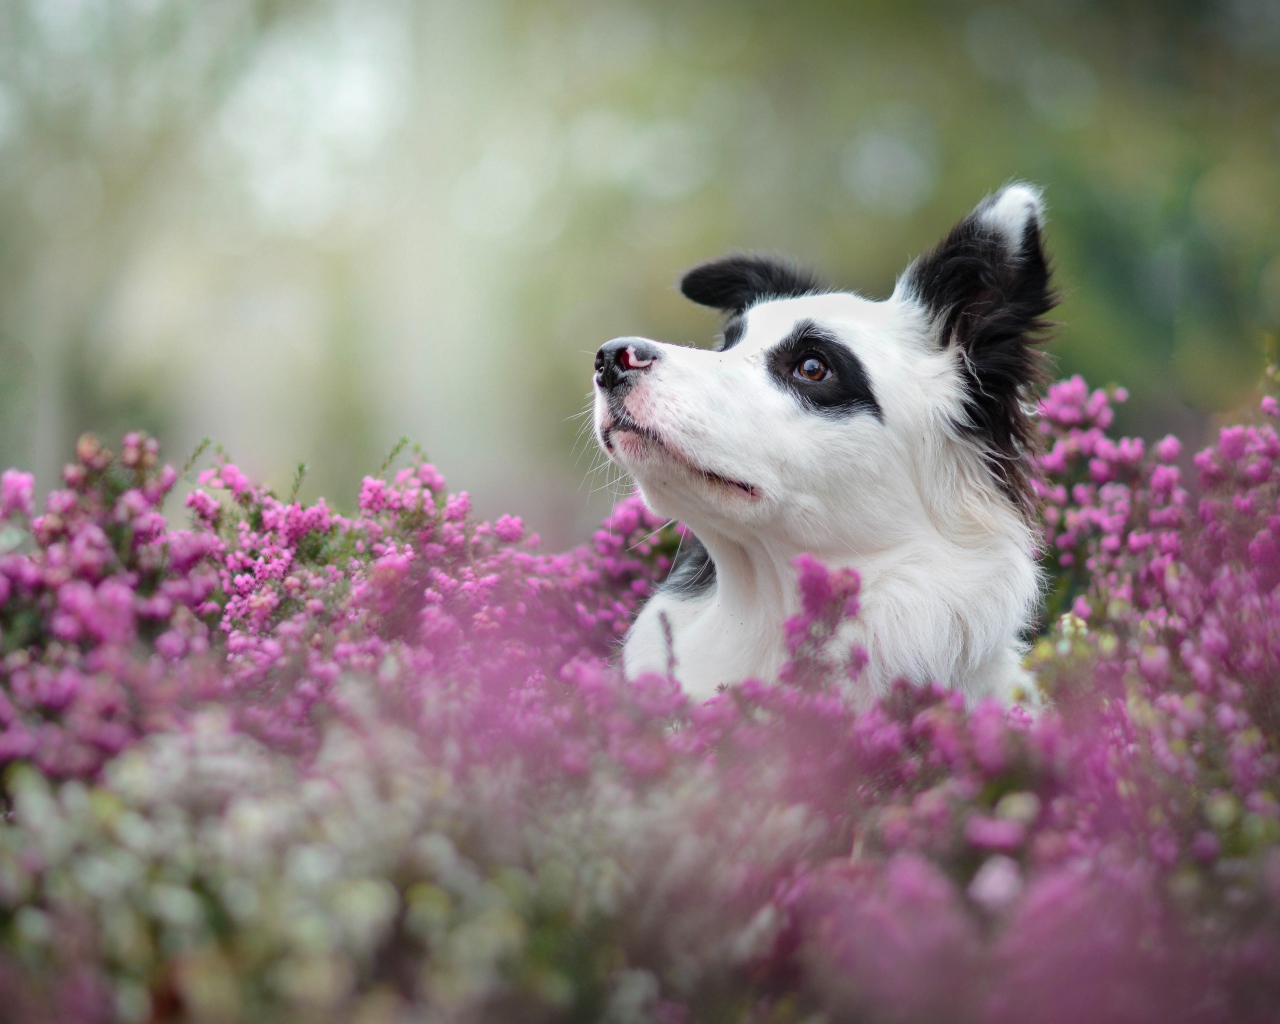 The dog breeds a border collie sitting in lilac flowers